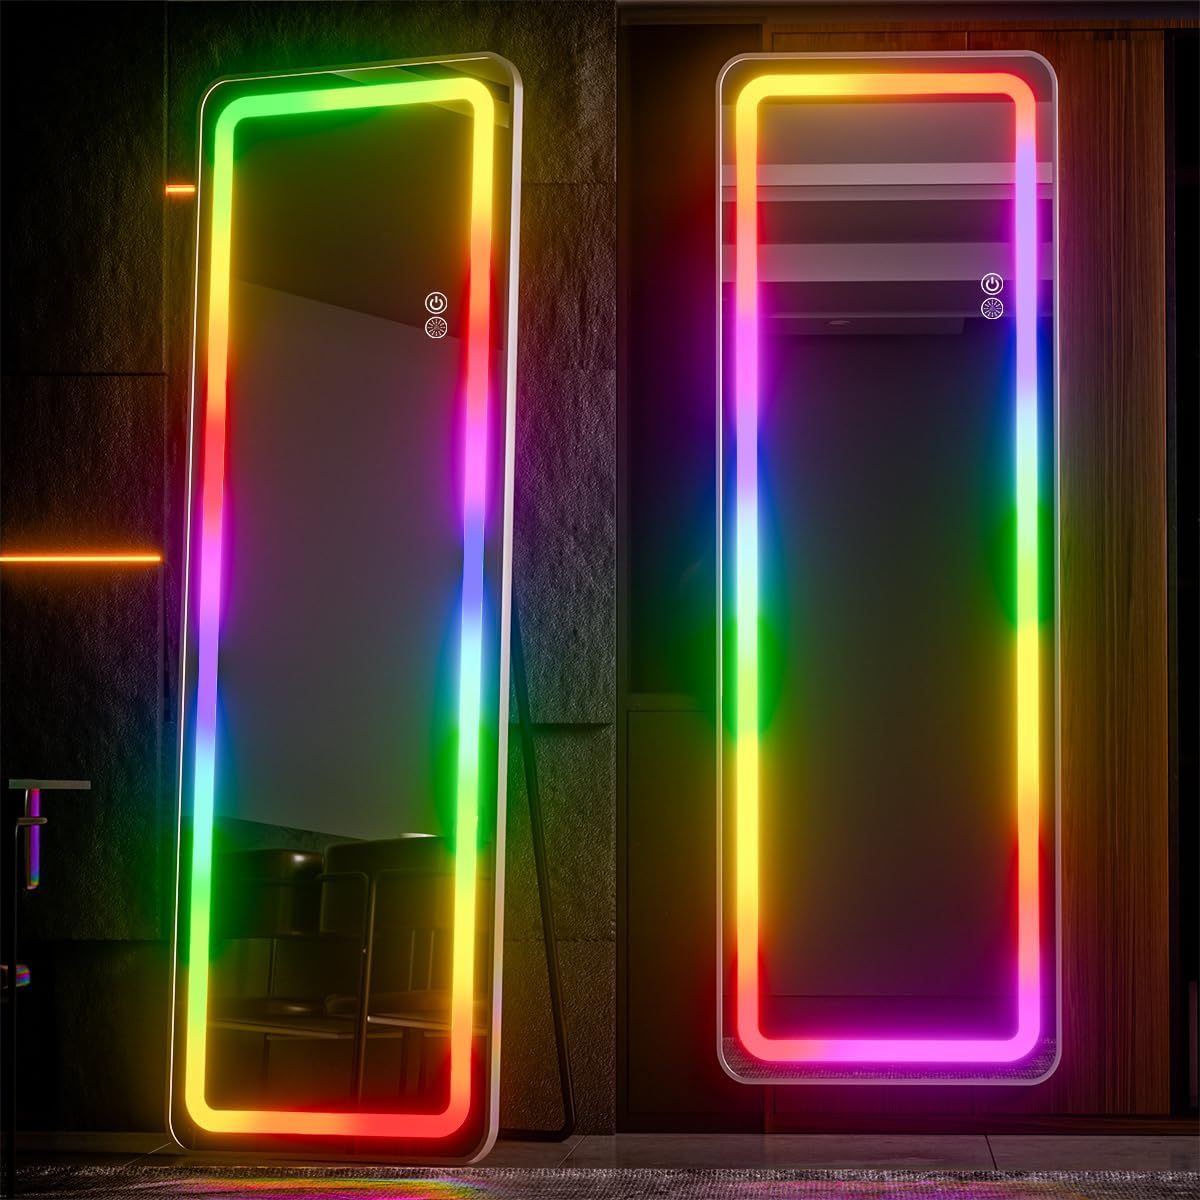 

Rgb Full Length Mirror, 63"x20" Full Body Mirror With Led Lights, Dimming & 7 Color Changing Lighting, Wall Mounted Hanging Mirror With Stand Free Standing Floor Mirror For Bedroom